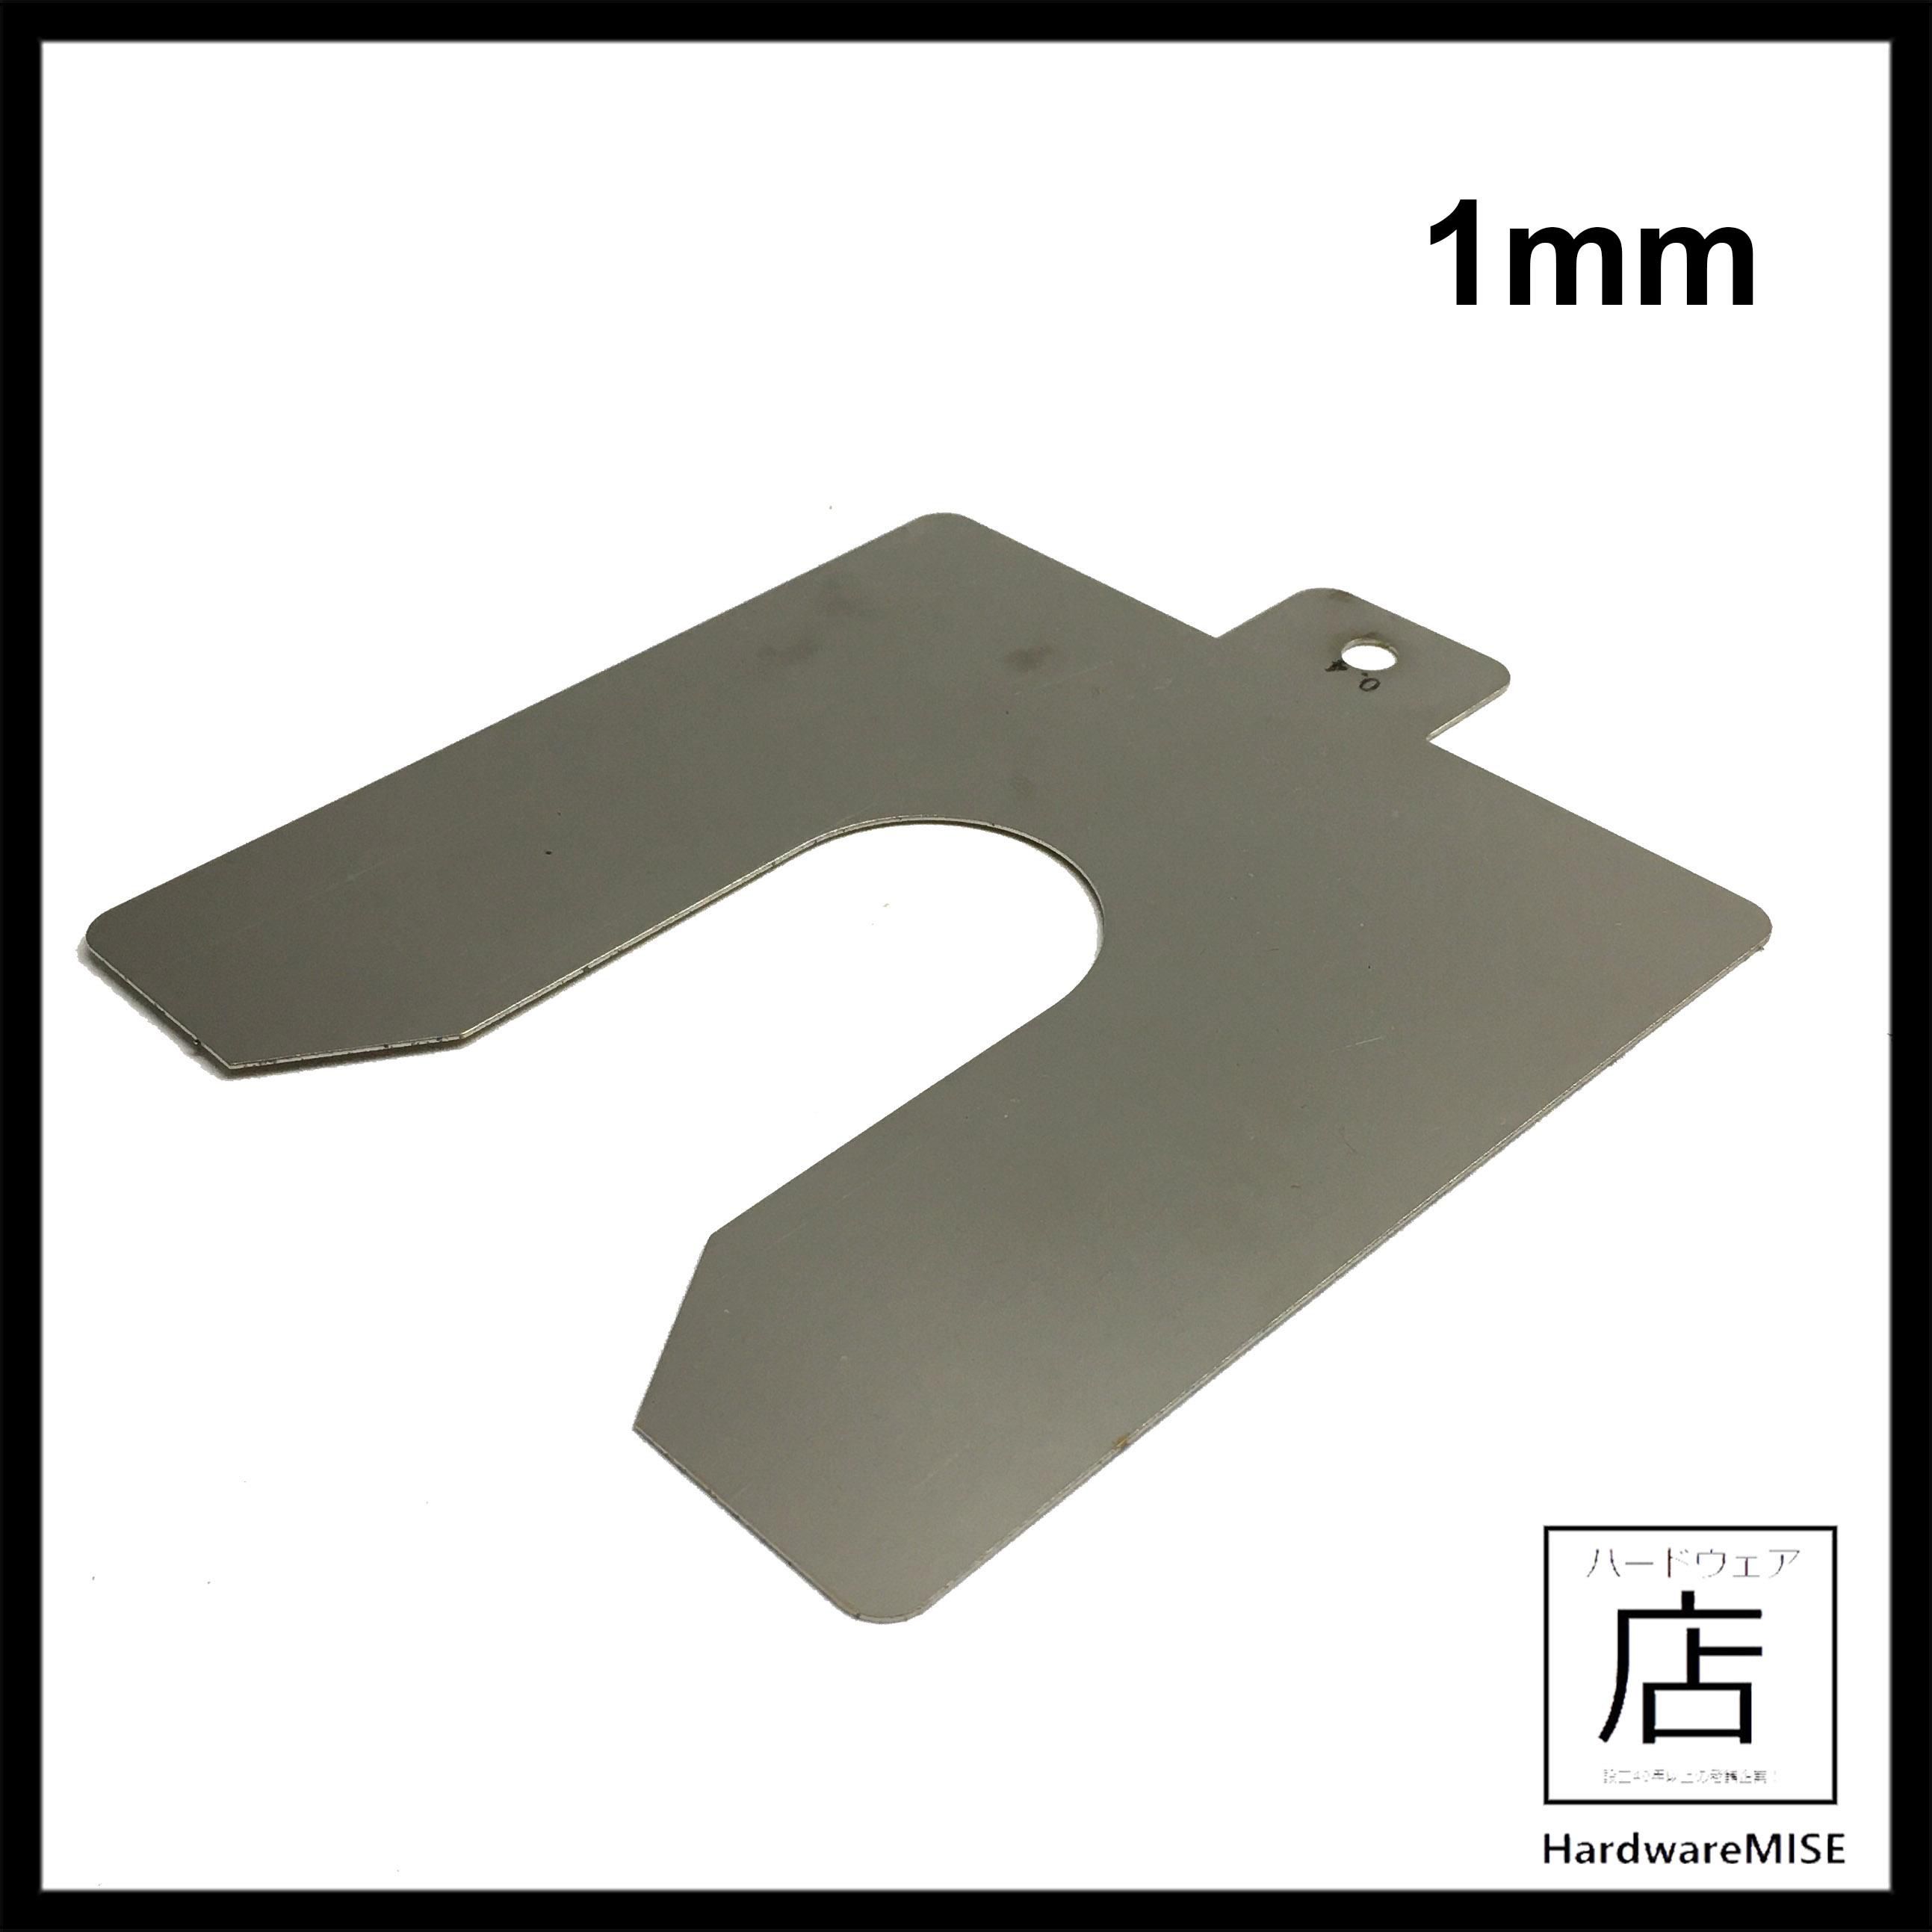 Hardwaremise 304 Stainless Steel Slotted Shim 1mm Pre-Cut Precision Shims Leveling Alignment